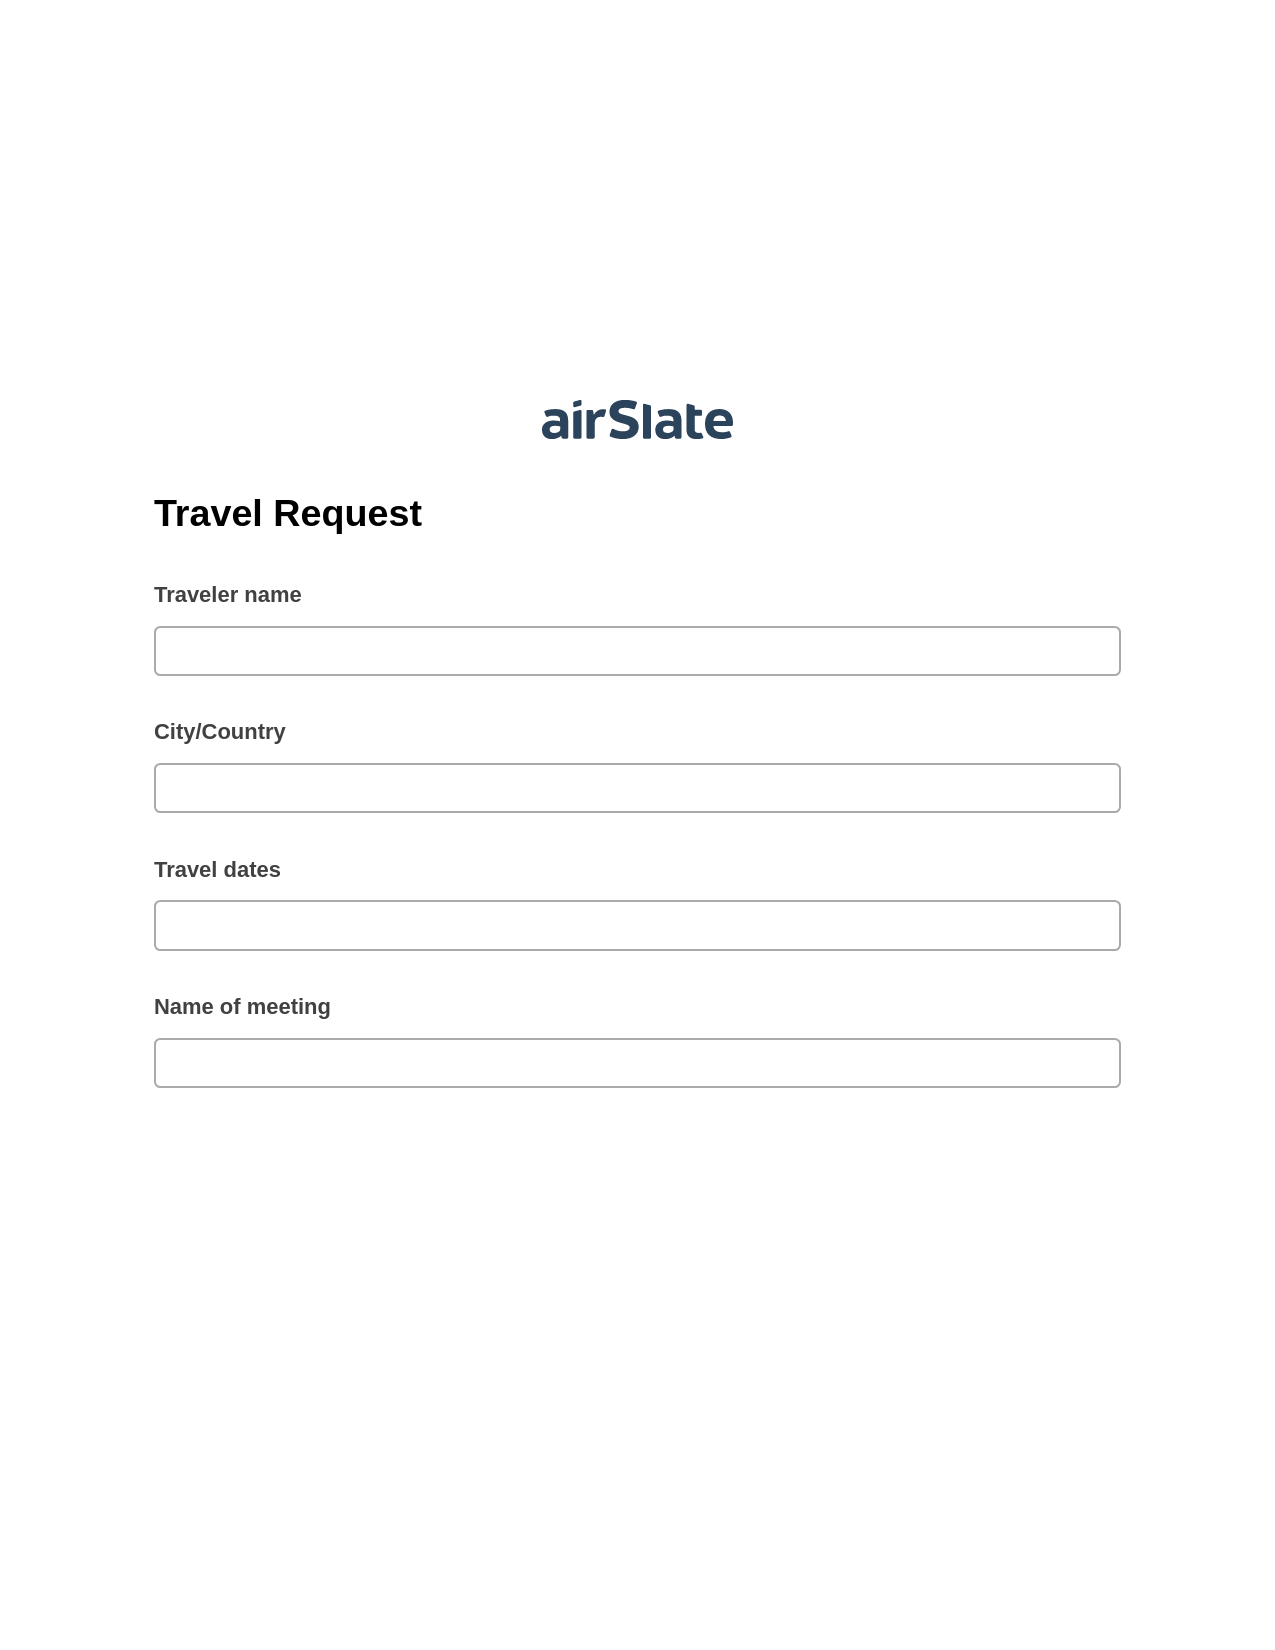 Multirole Travel Request Pre-fill Dropdown from Airtable, Create Slate Reminder Bot, OneDrive Bot